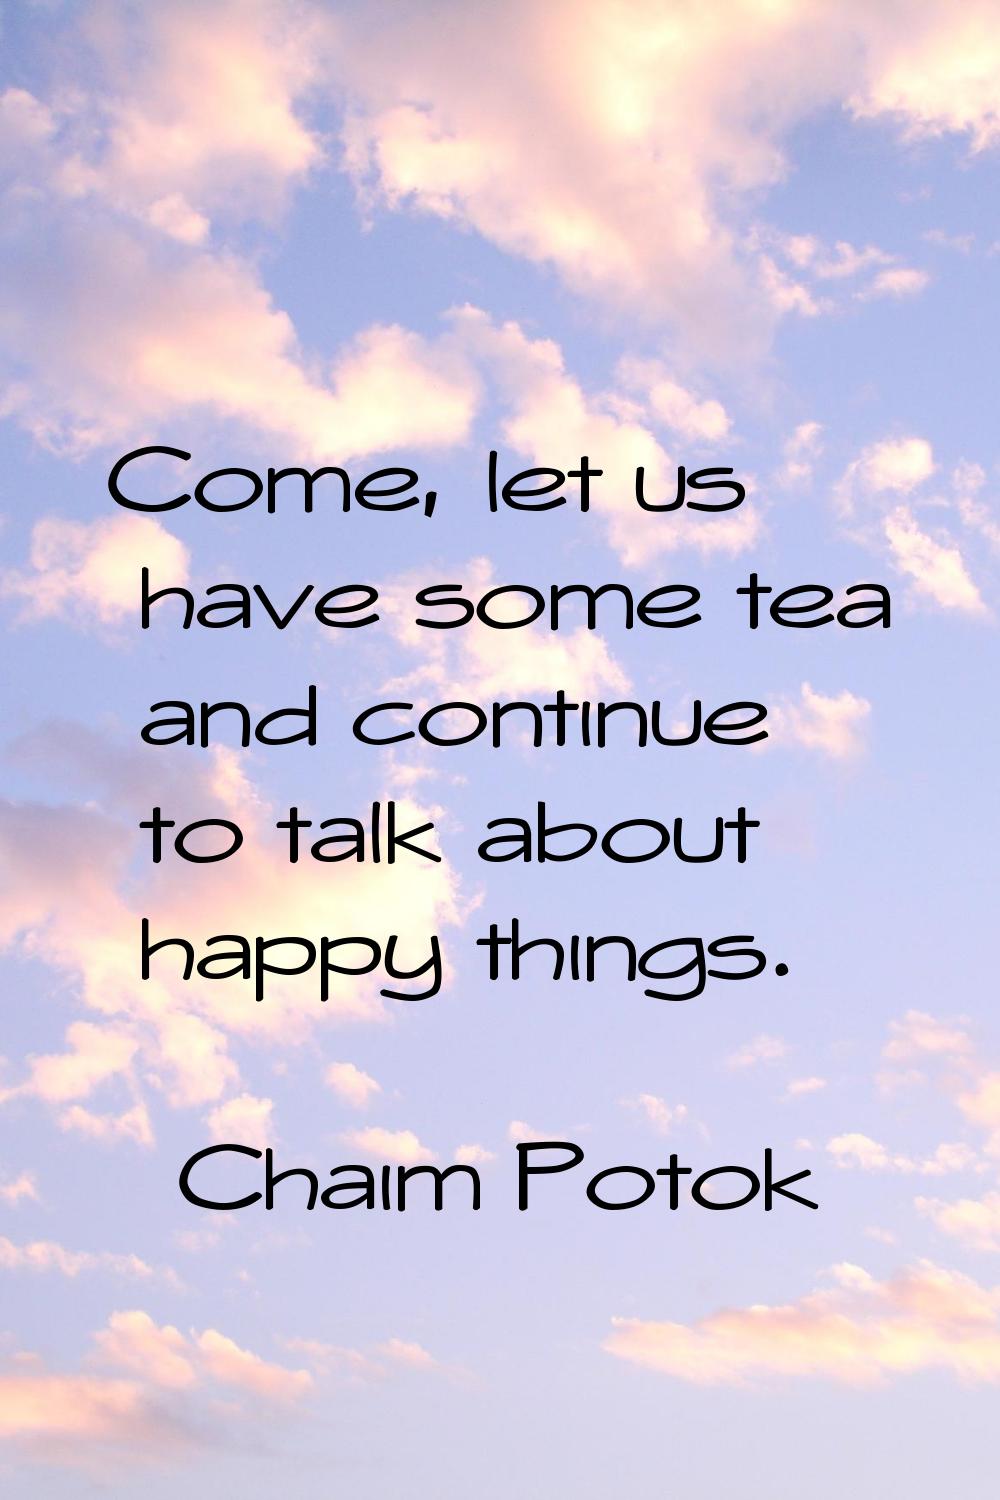 Come, let us have some tea and continue to talk about happy things.